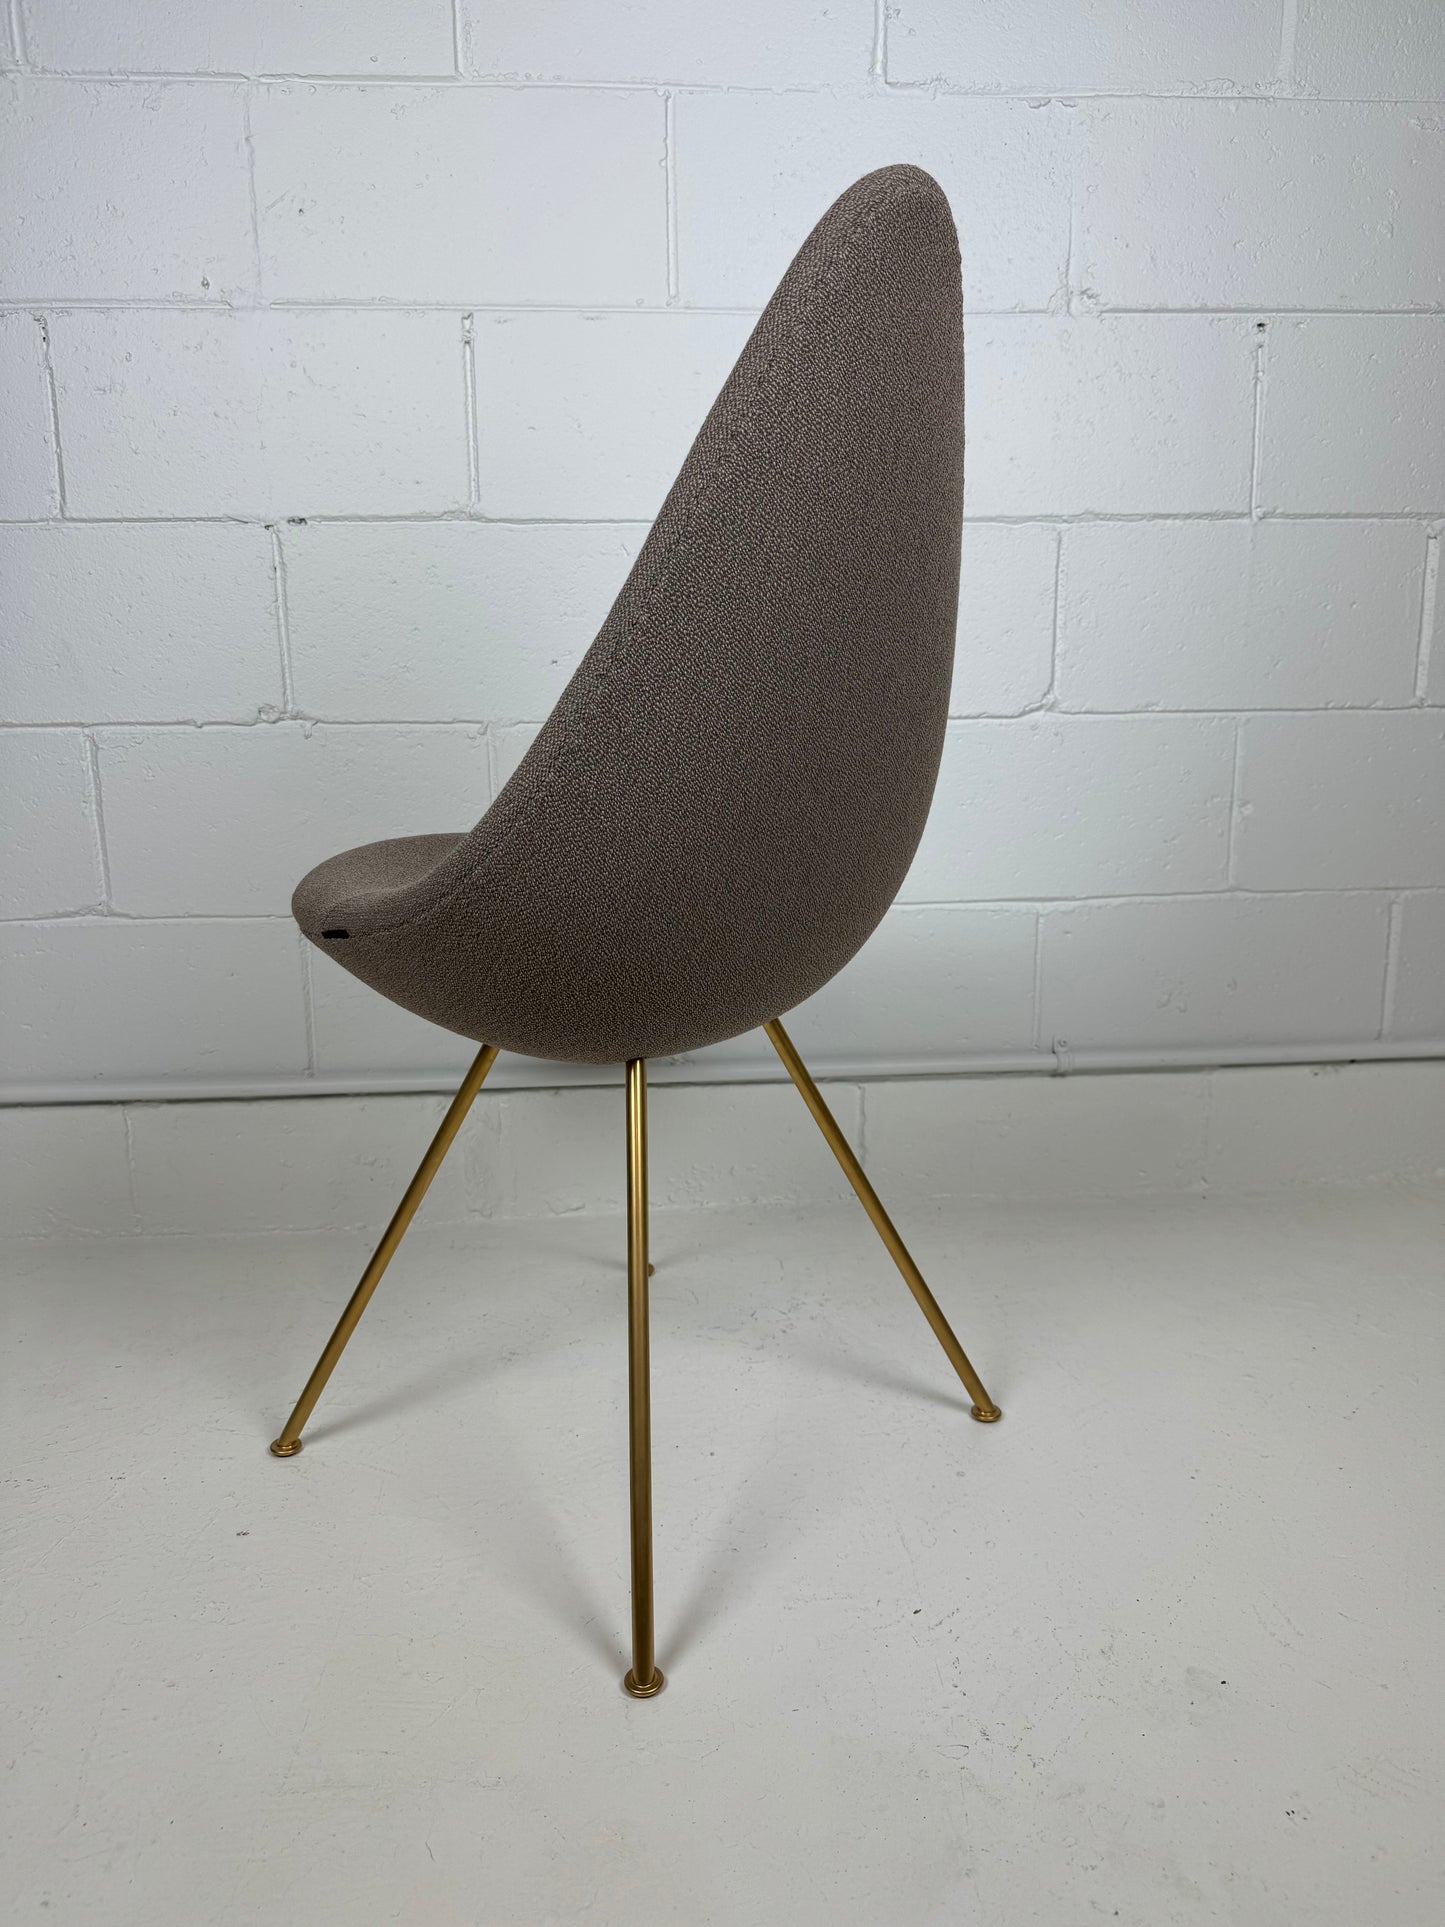 Arne Jacobsen 60th Anniversary Limited Edition Drop Chair by Fritz Hansen